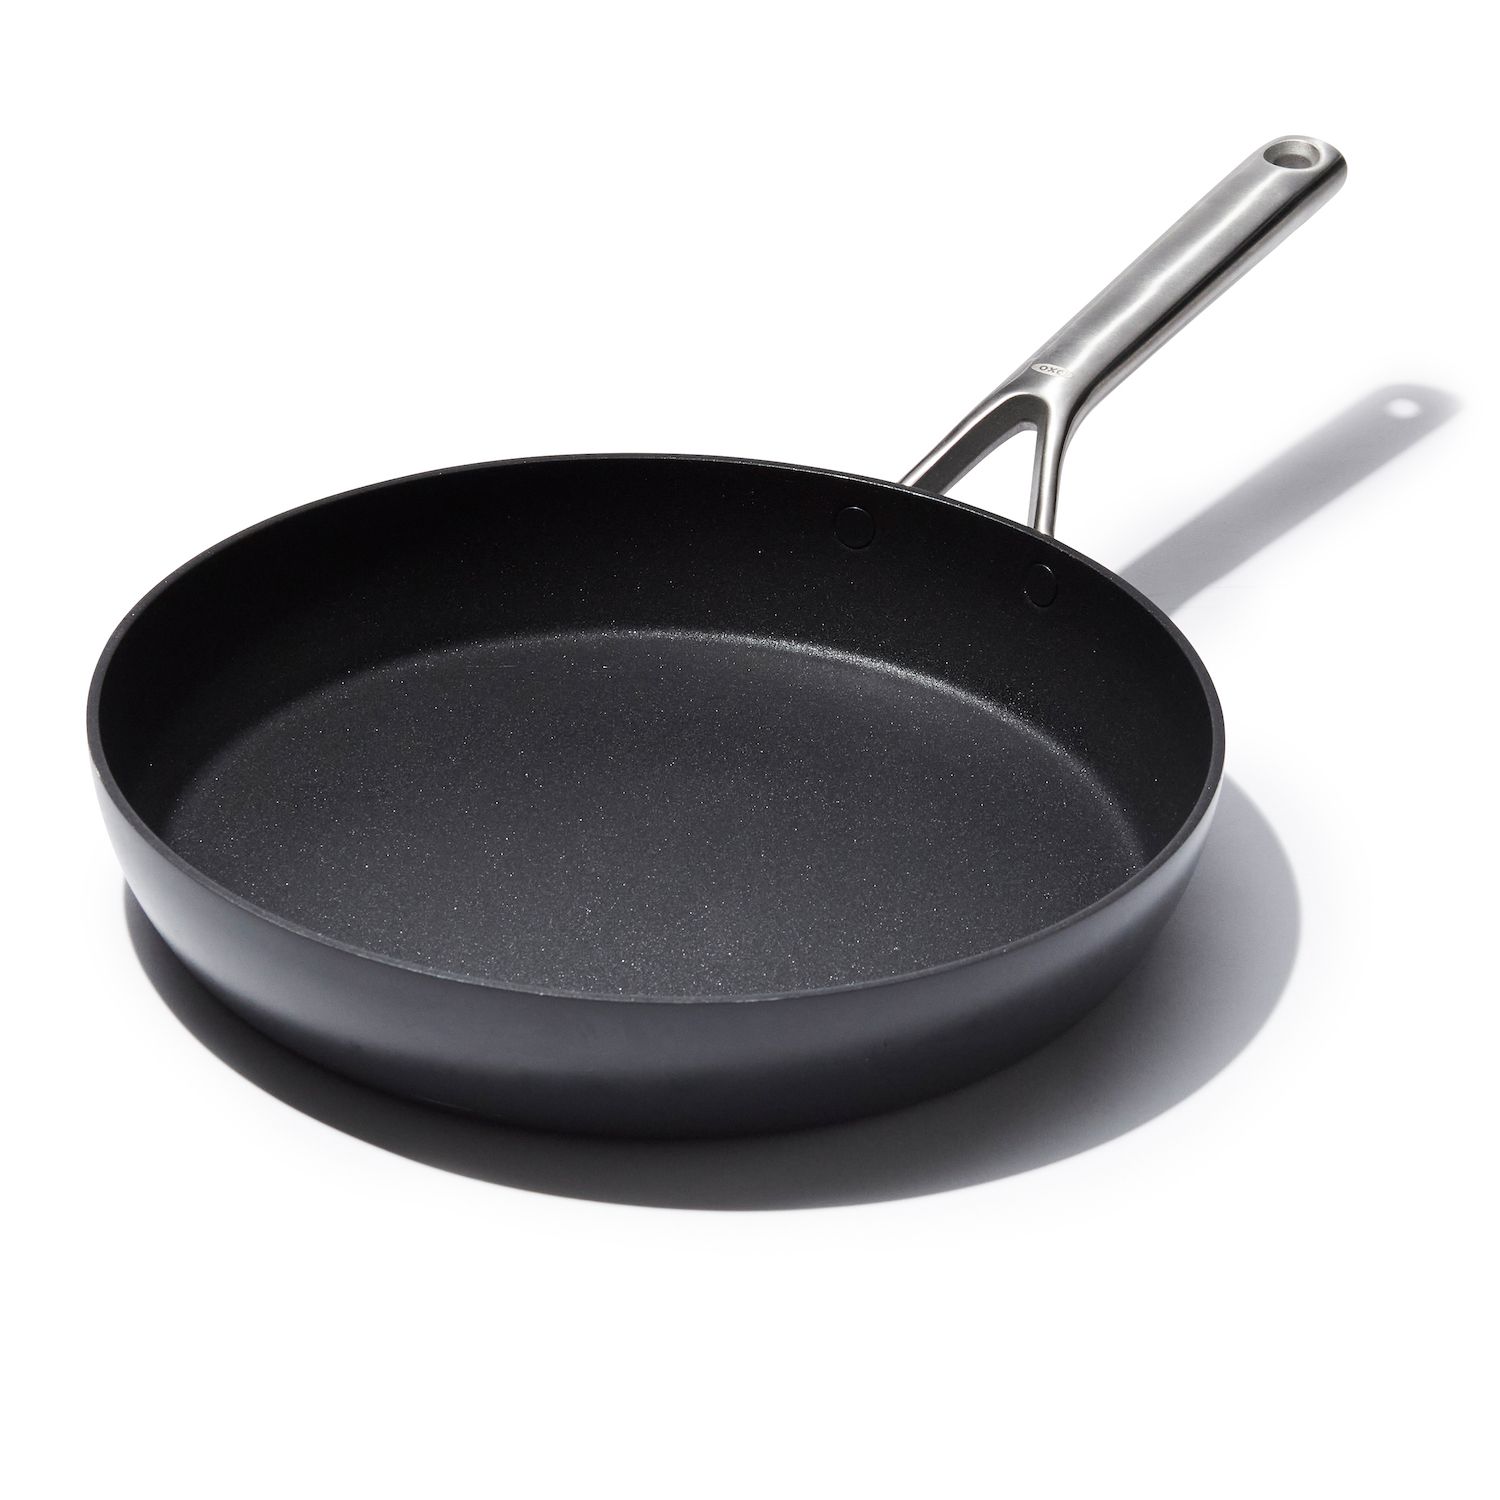 Stainless Steel Black 12 inch Crofton Quan Tanium Frypan, For Kitchen, Round